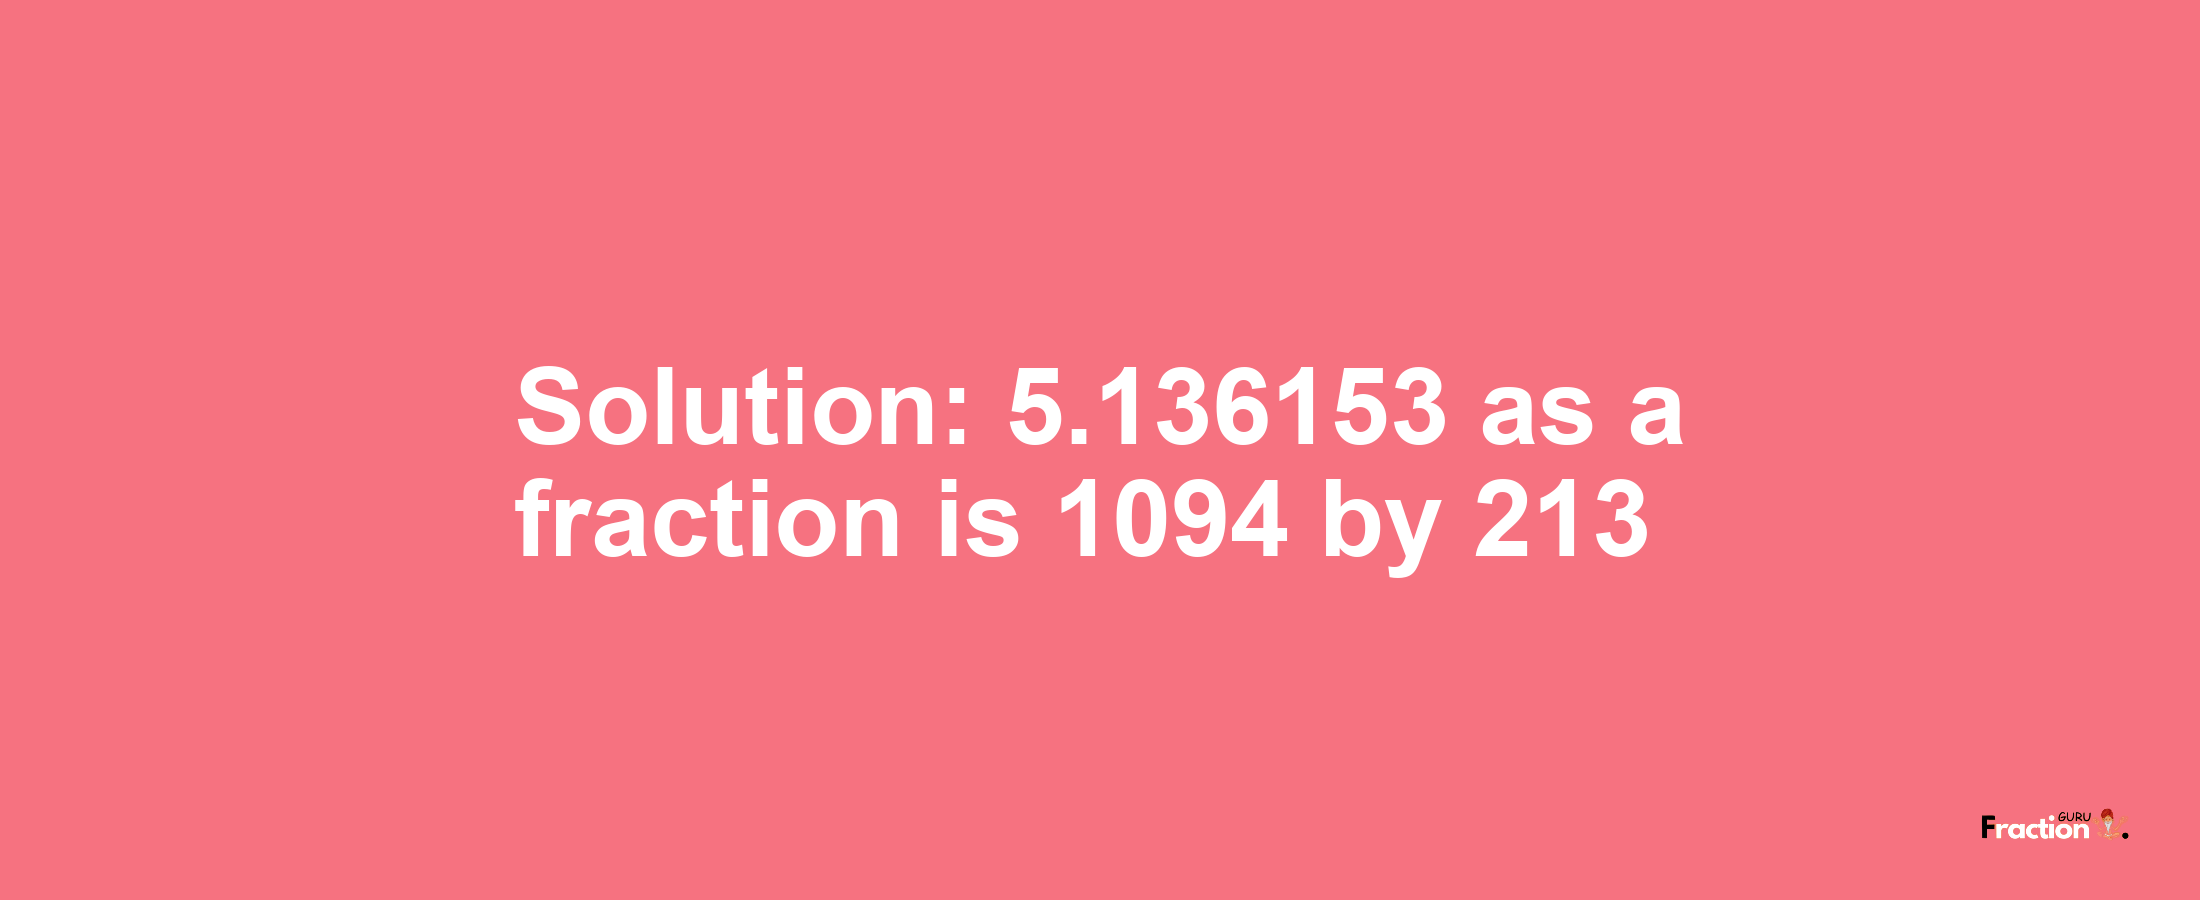 Solution:5.136153 as a fraction is 1094/213